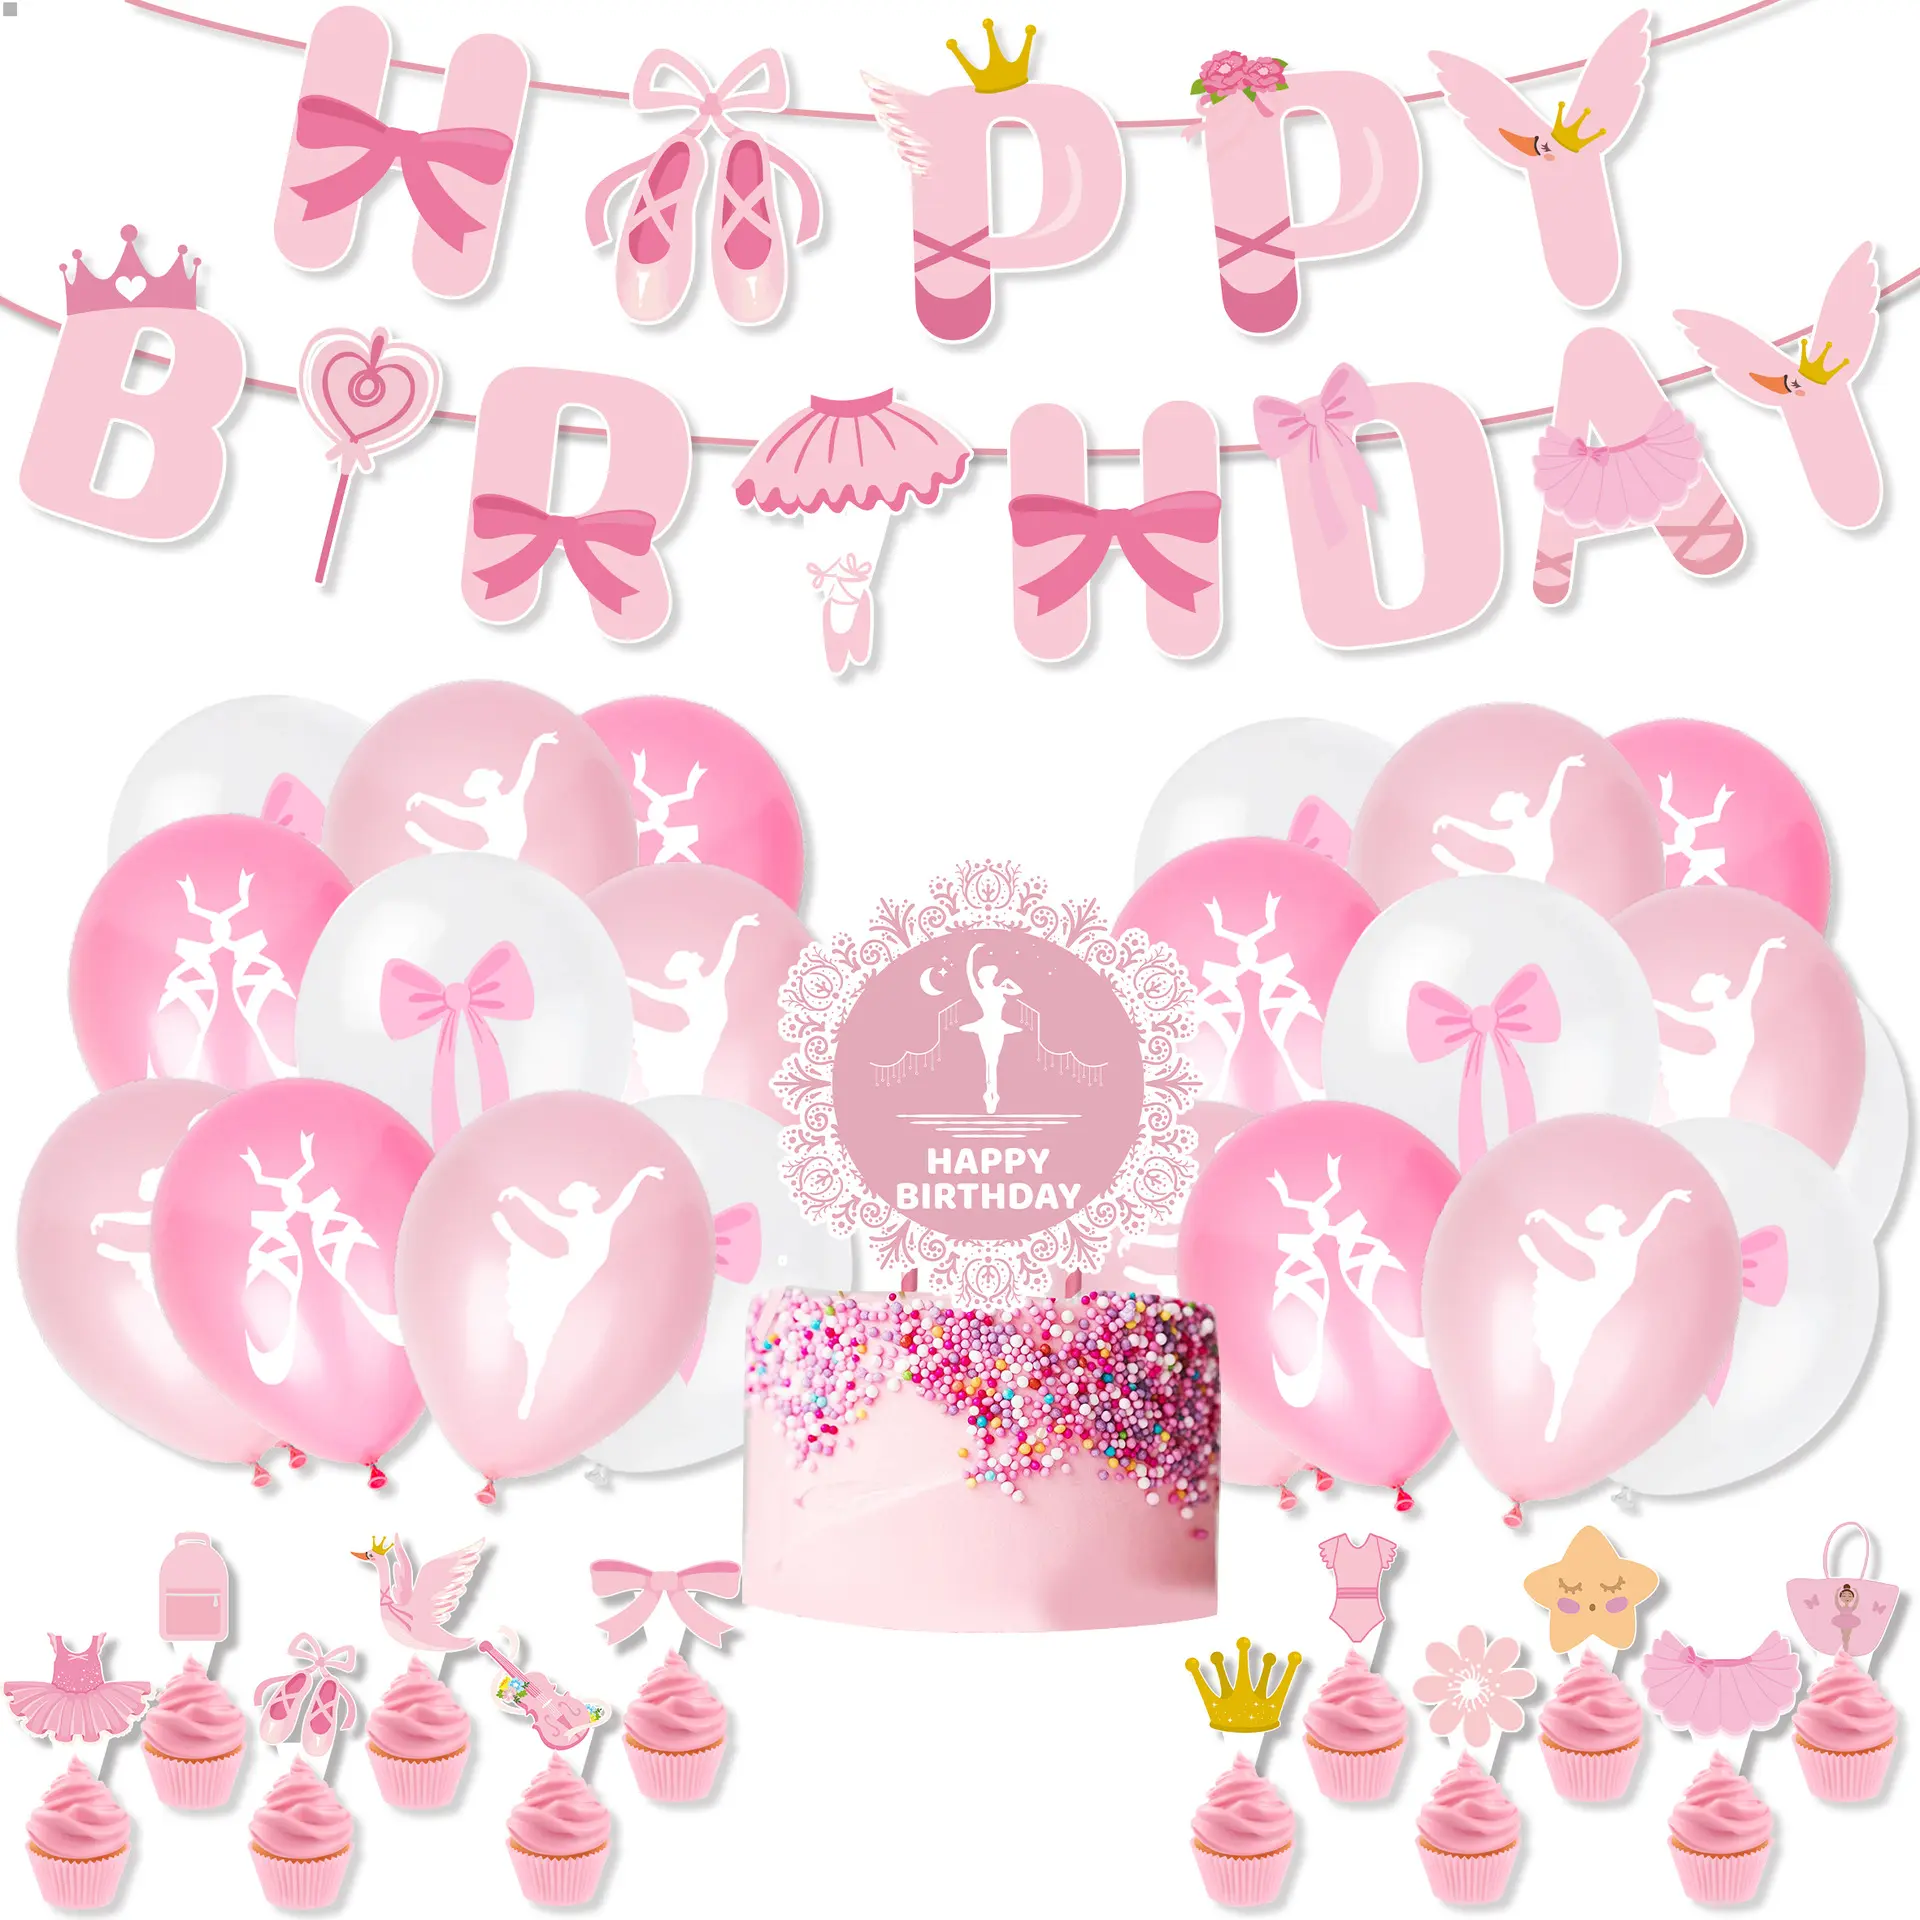 LUCKY Ballet Princess set party dessert table decoration baby birthday party decoration children's party balloon set wholesale